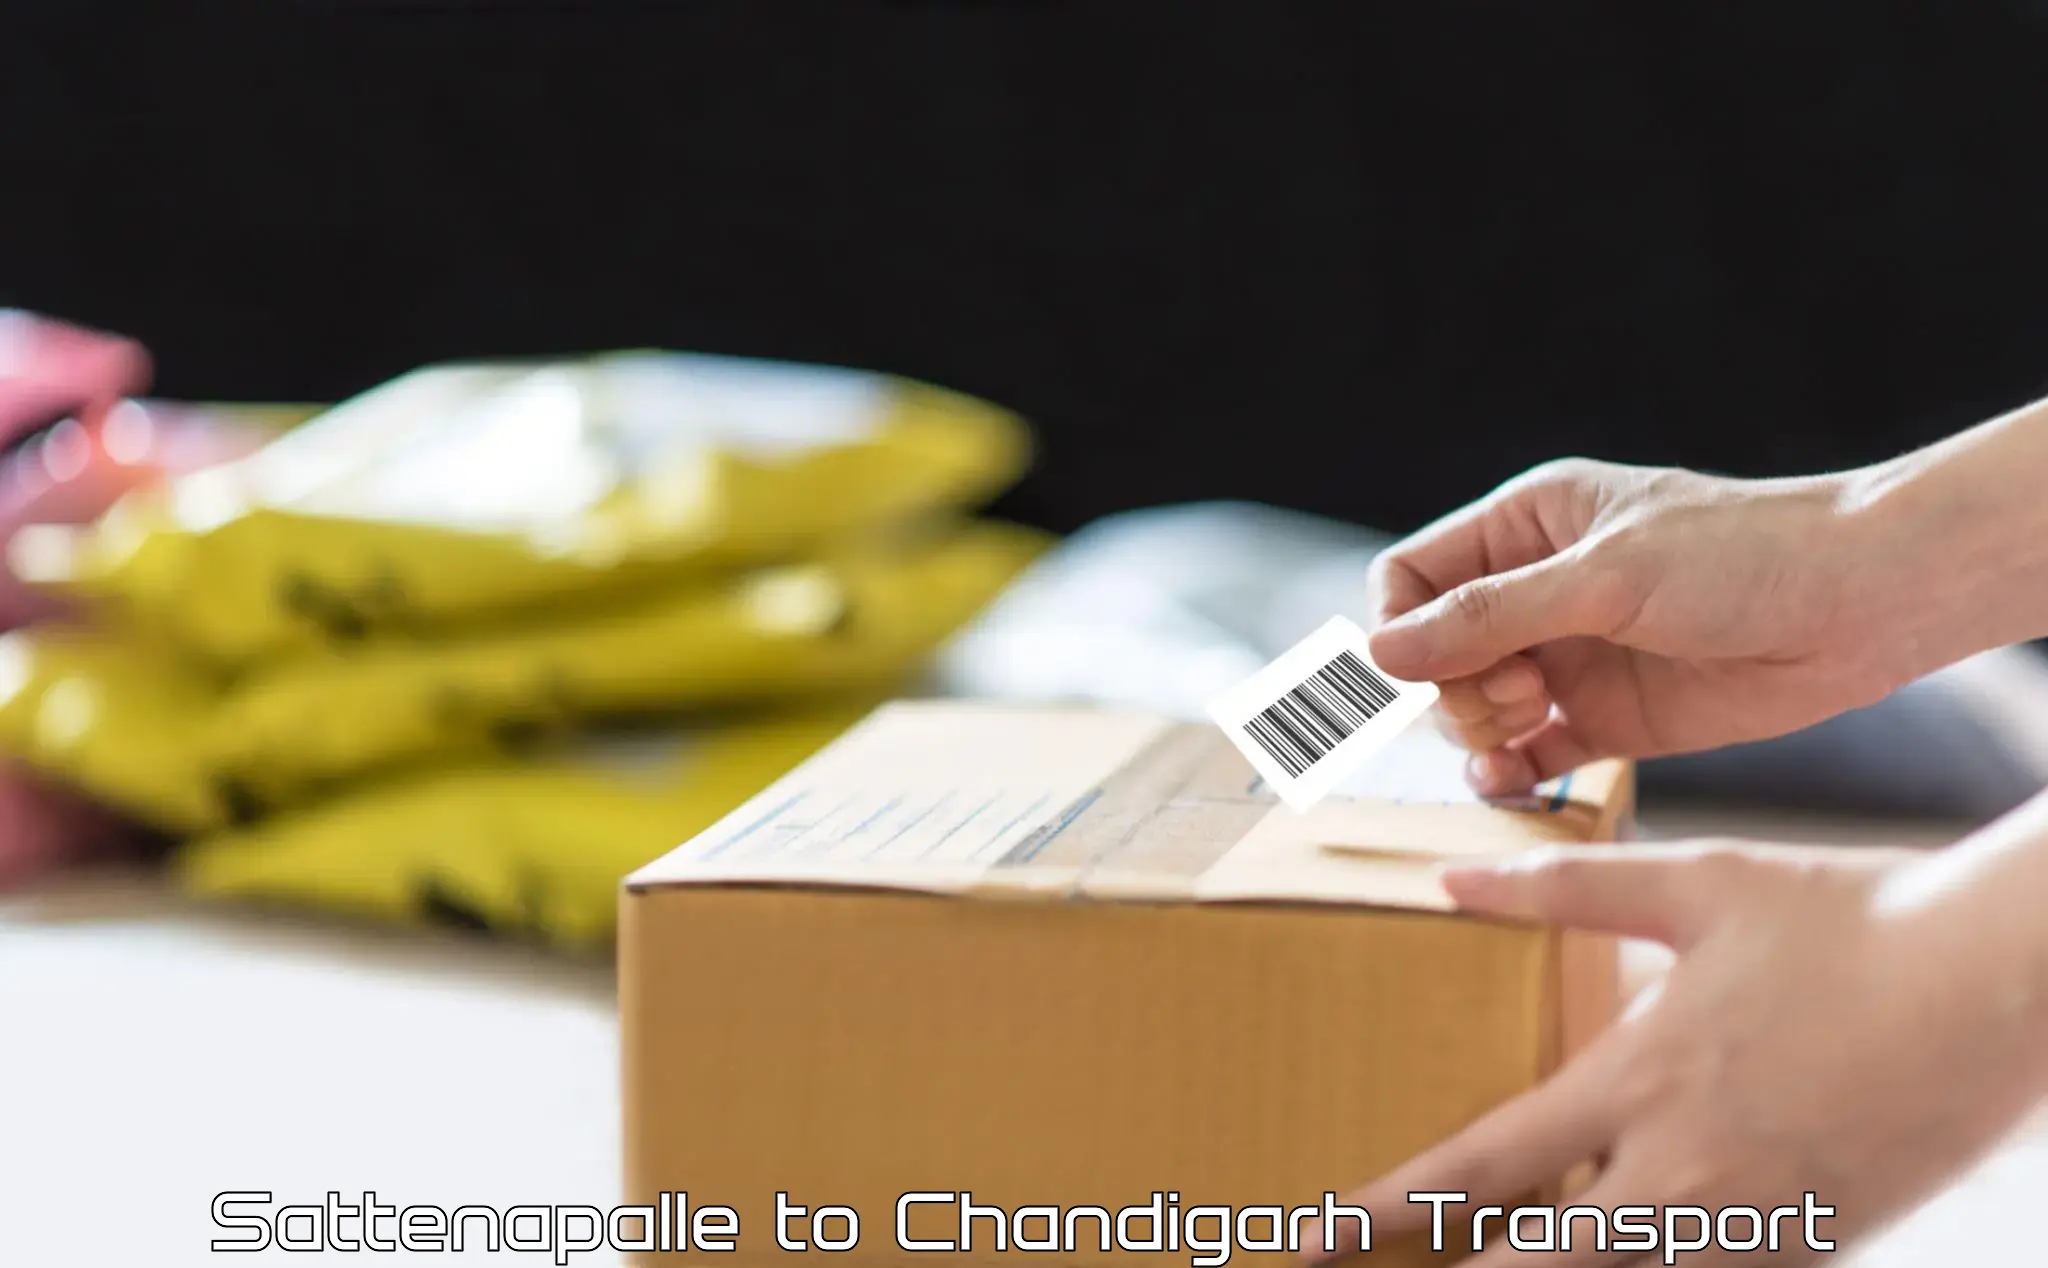 India truck logistics services Sattenapalle to Chandigarh